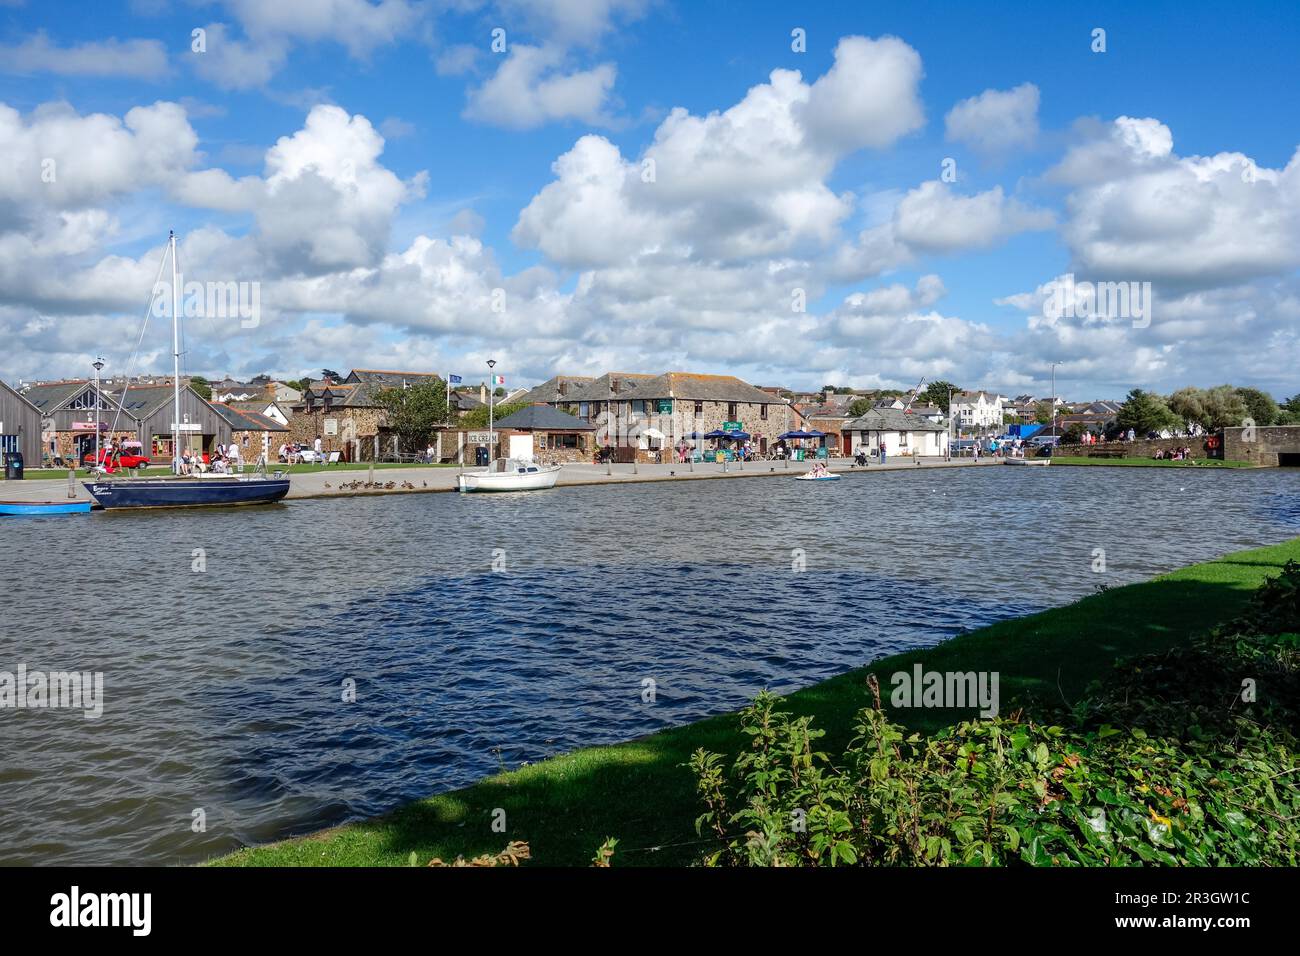 BUDE, CORNWALL, UK - AUGUST 12 : The Canal at Bude in Cornwall on August 12, 2013. Unidentified people Stock Photo